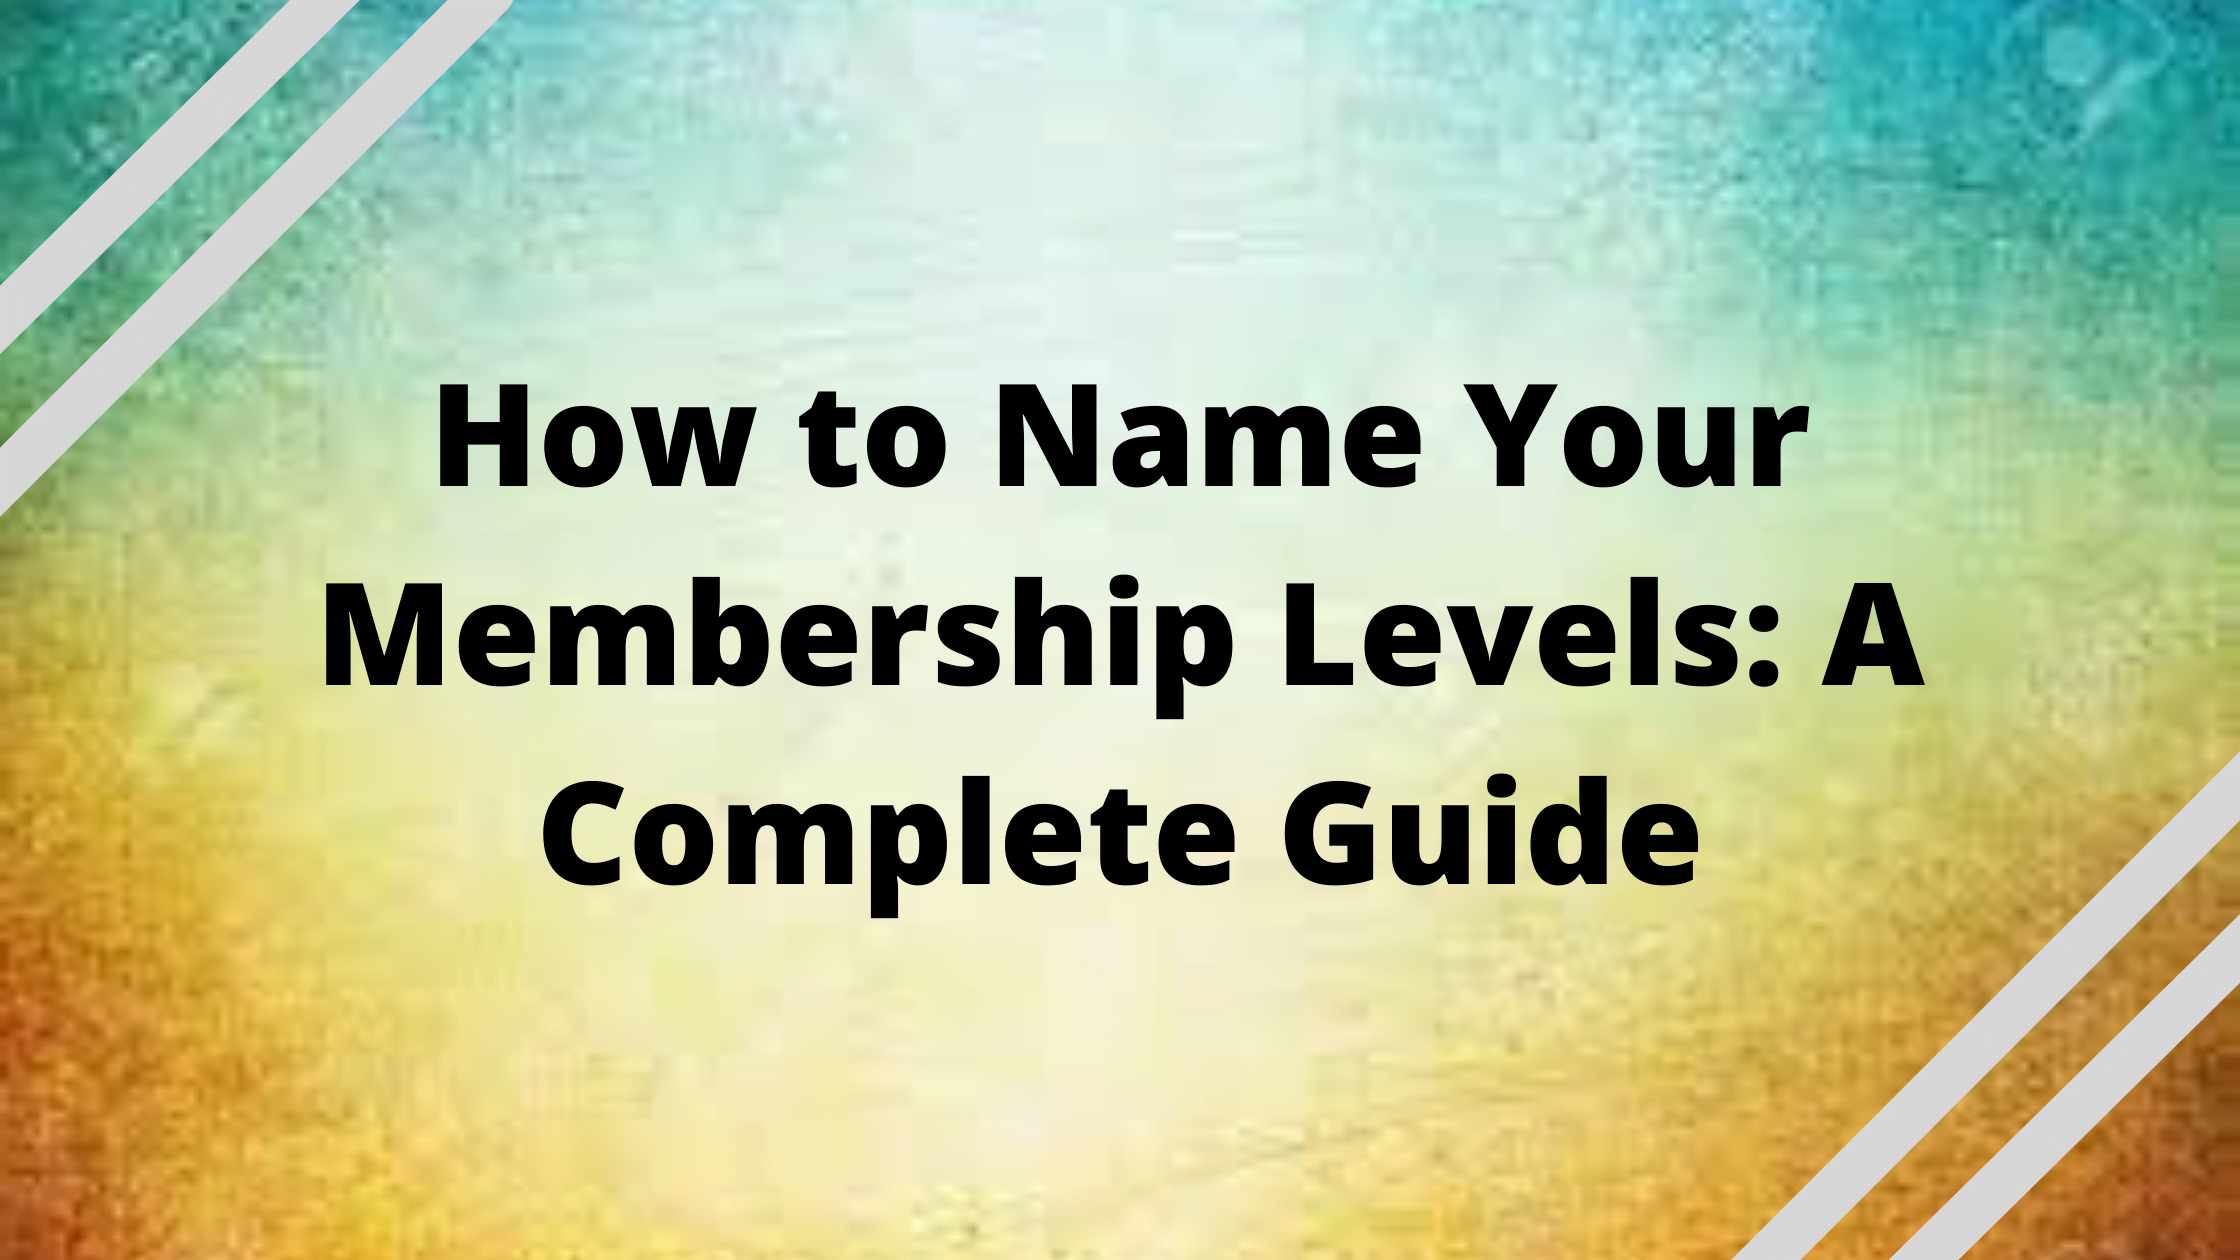 How to Name Your Membership Levels: A Complete Guide